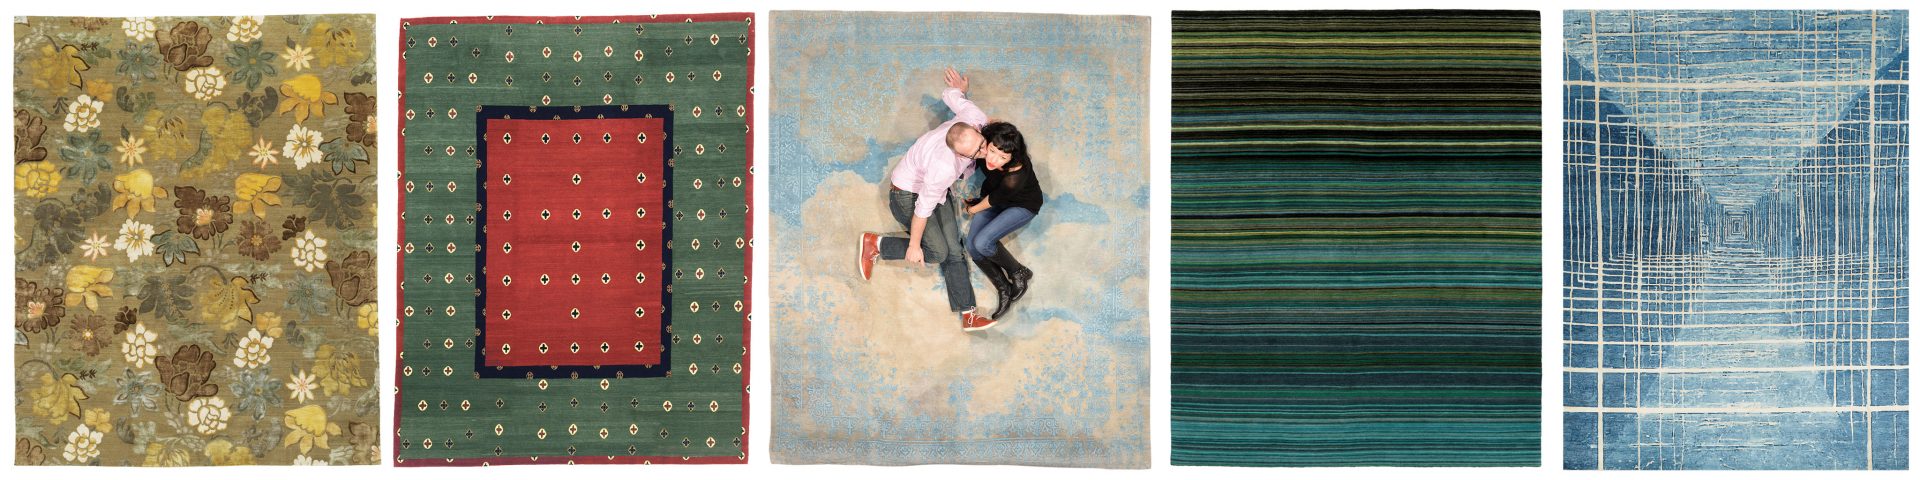 The Ruggist Presents: For the Love of Carpets! An exploration of modern carpets spanning the turn of the twenty-first century.